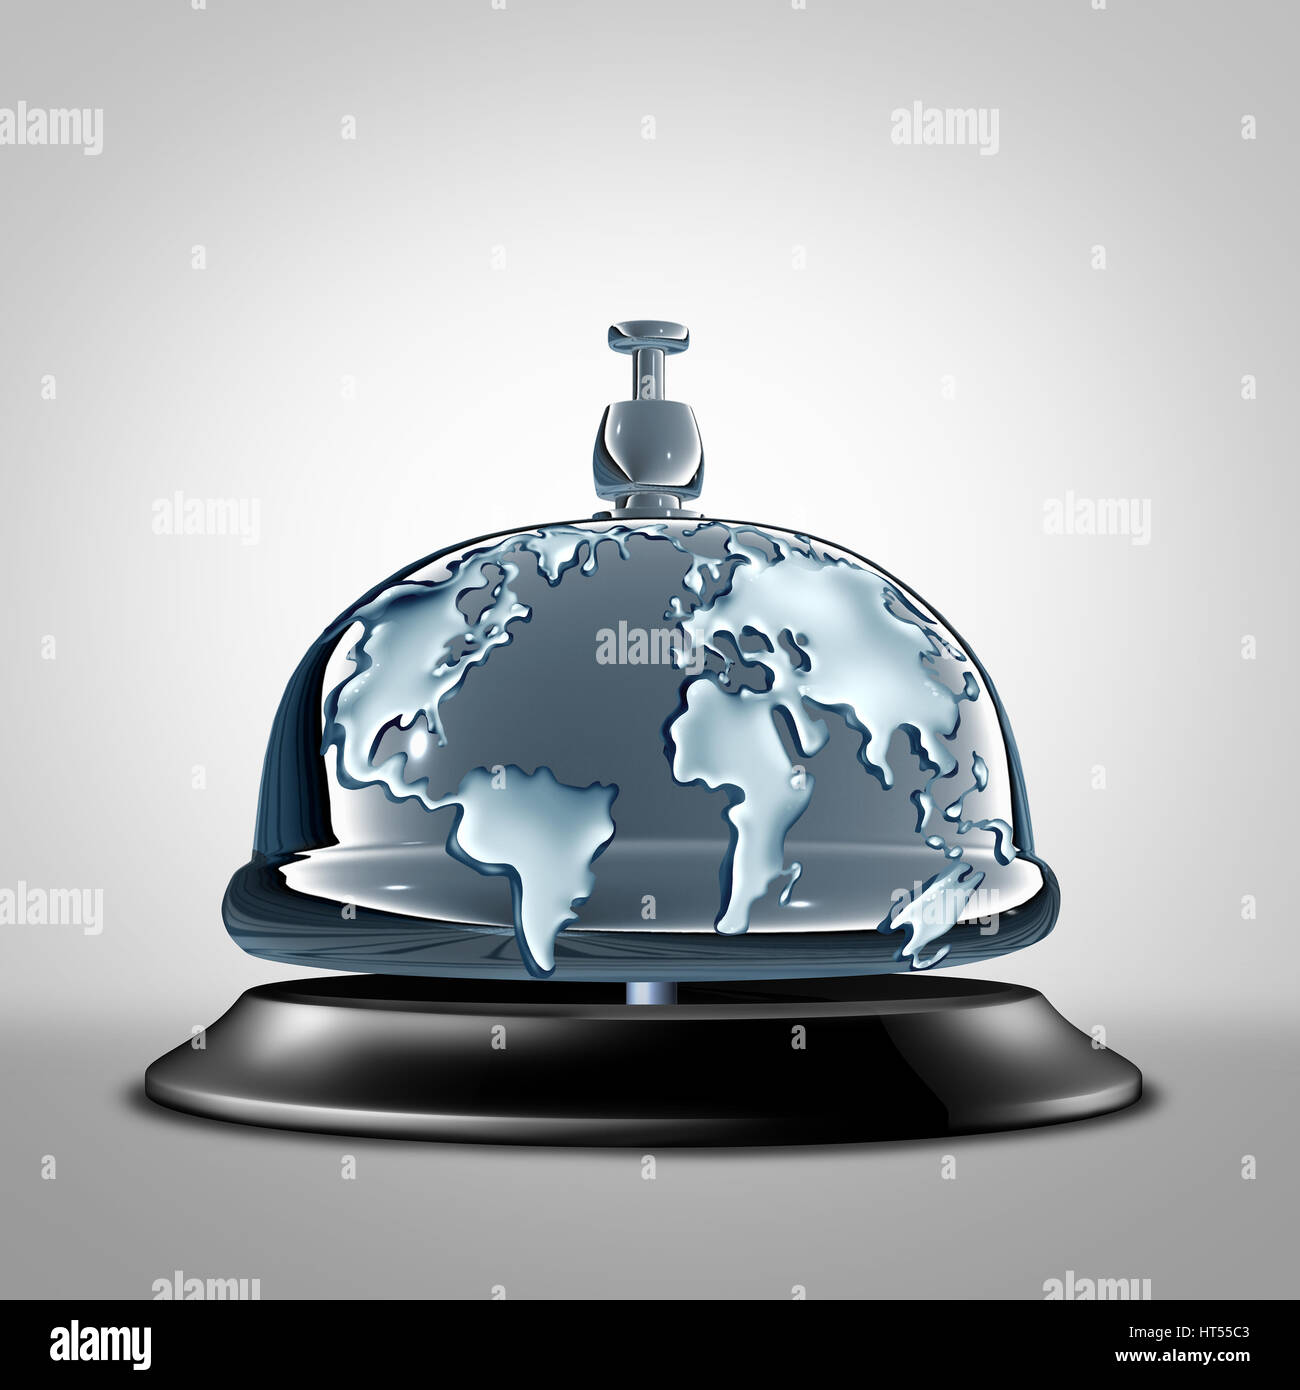 Global service symbol as a front desk hotel bell with the world in the silver as a metaphor for globe communication services and vacation. Stock Photo